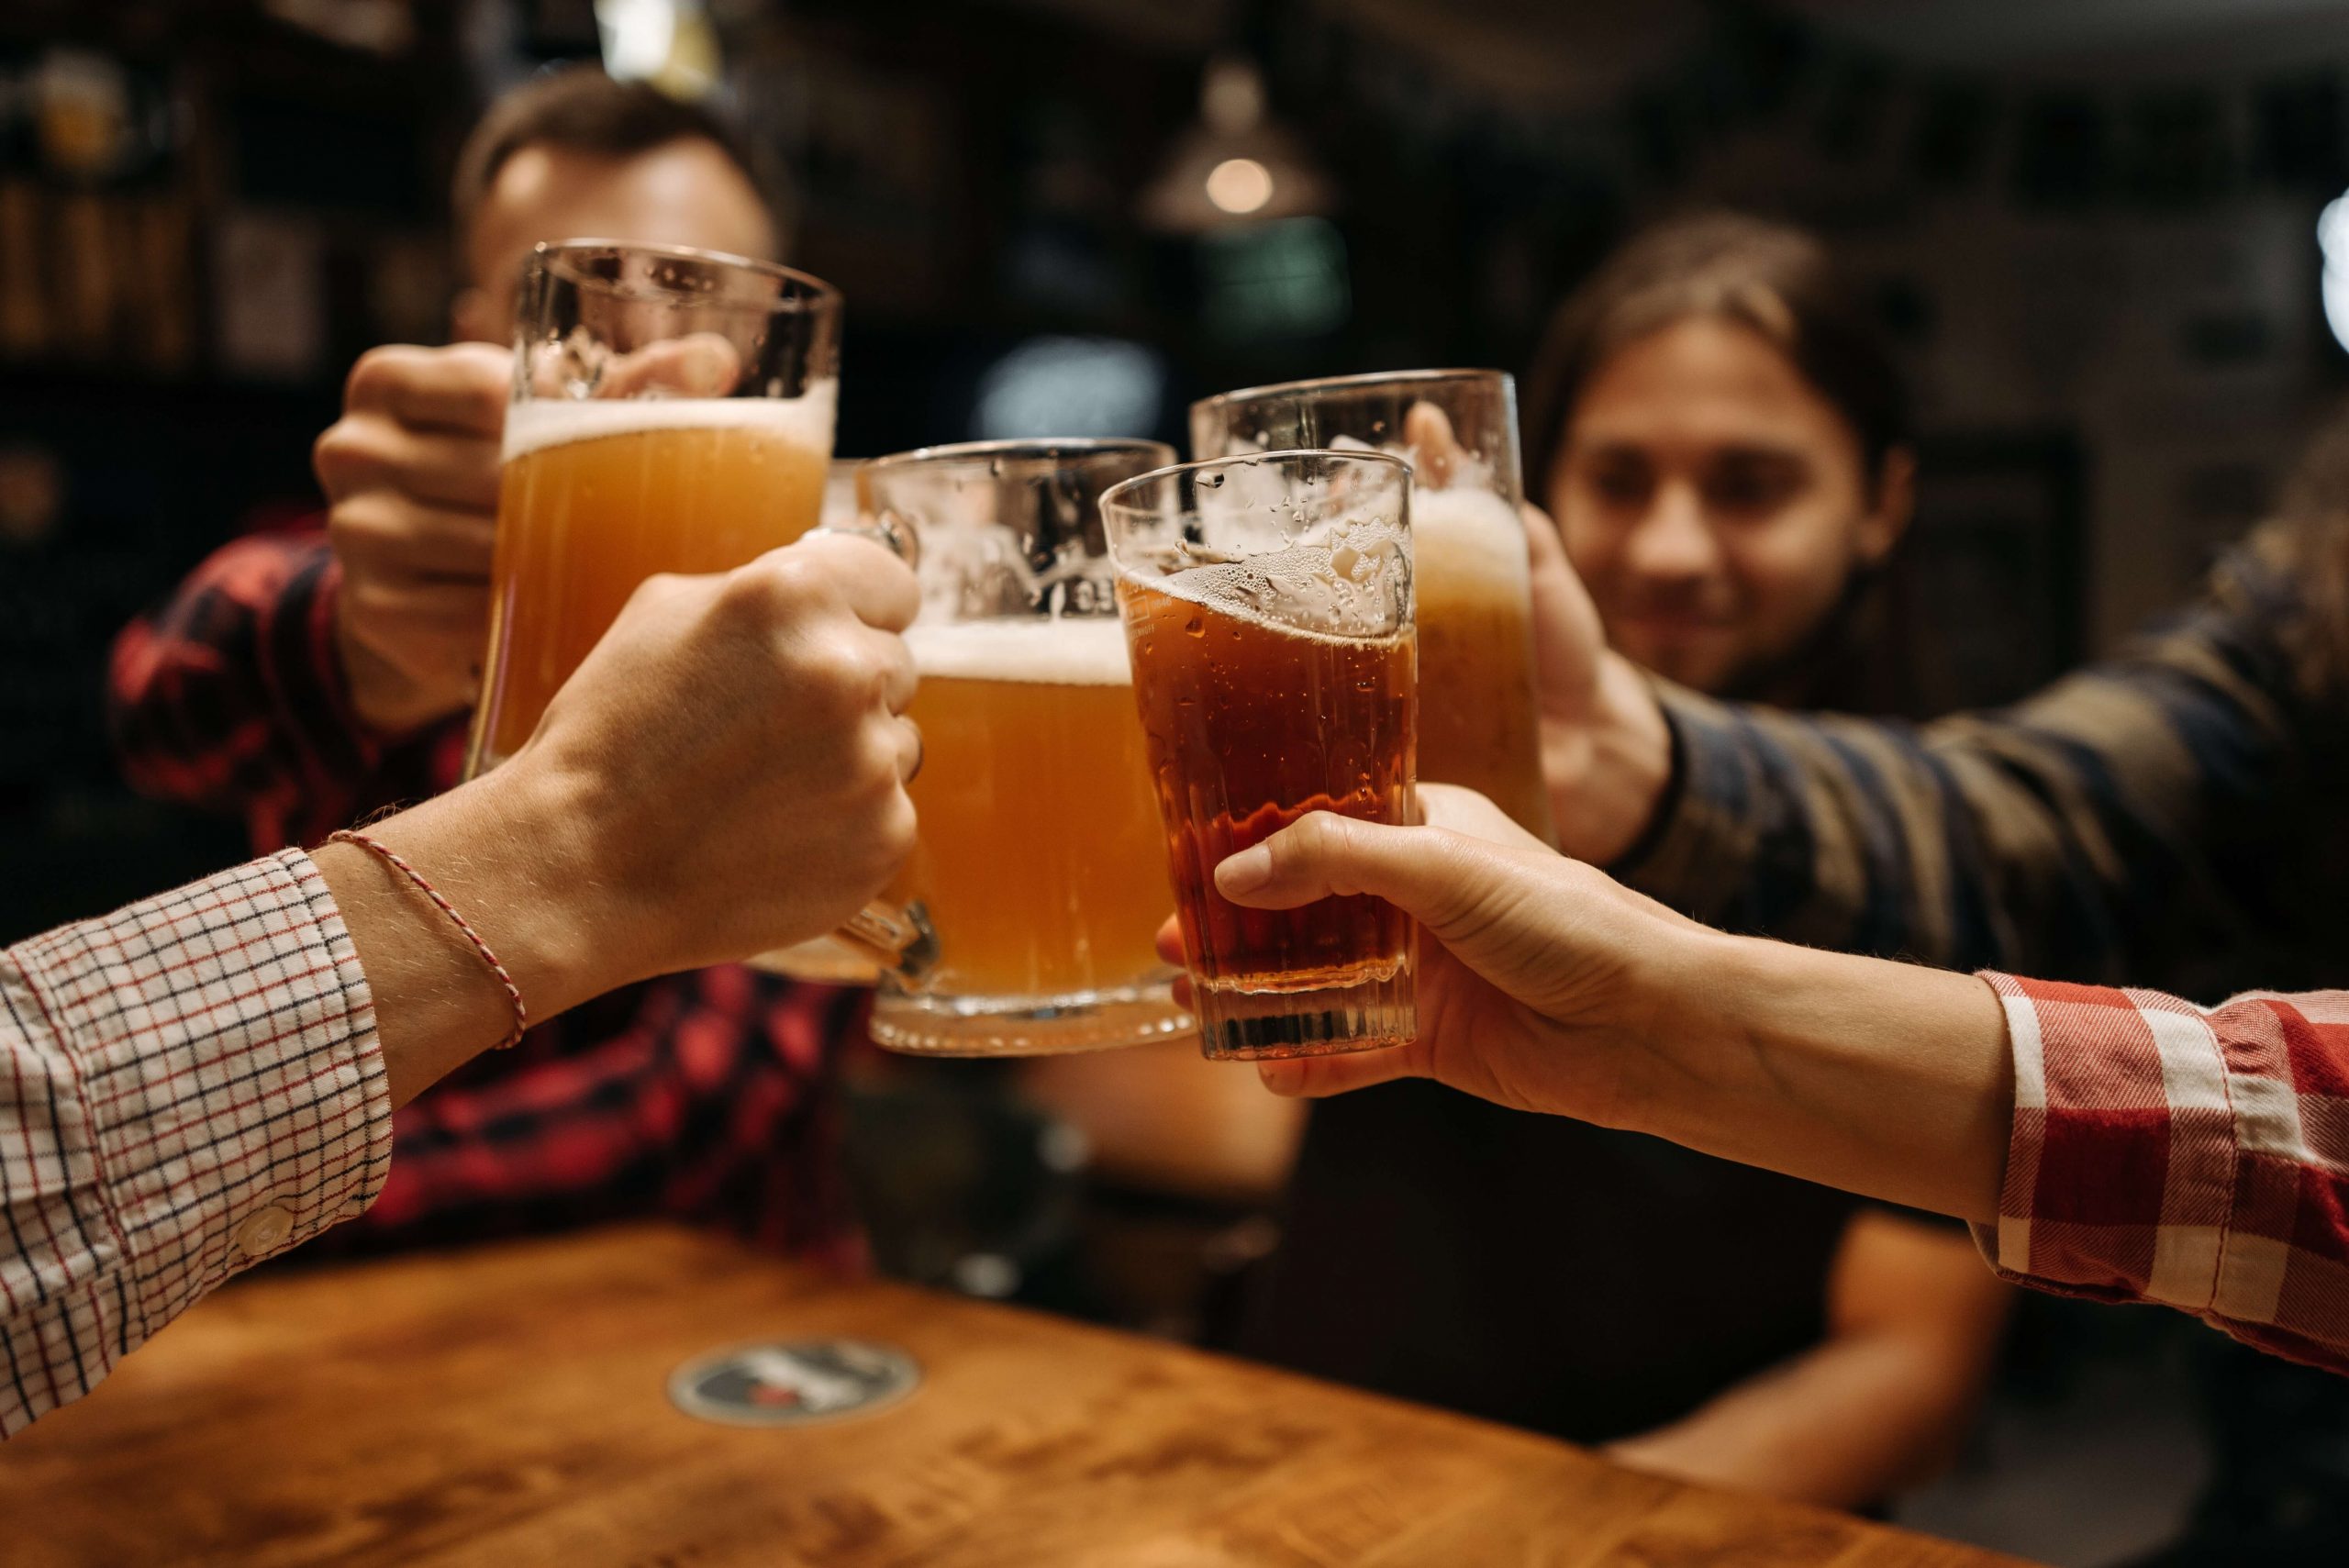 A group of people toasting beer glasses at a bar.